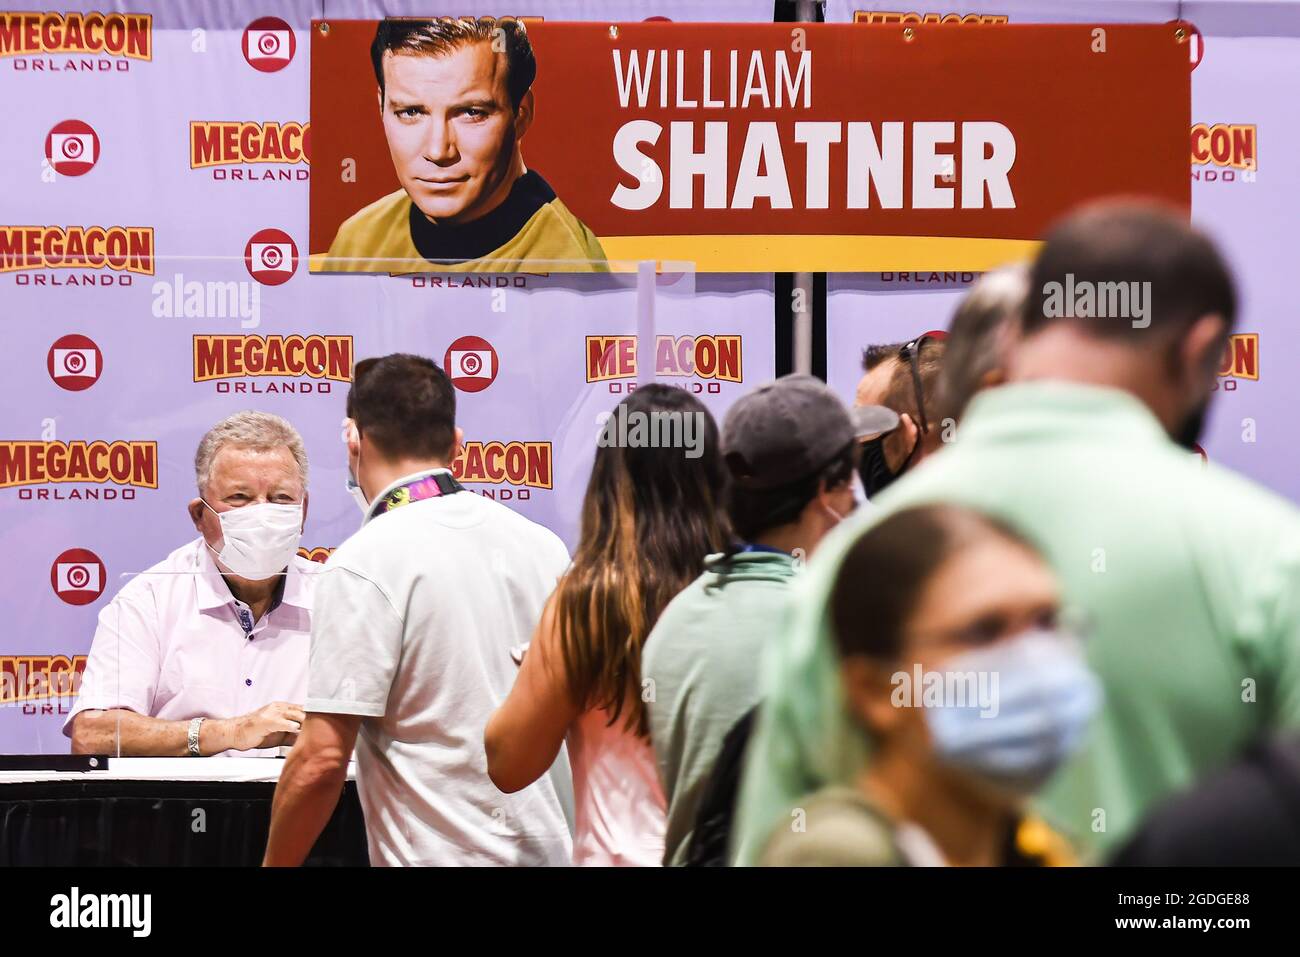 Orlando, United States. 12th Aug, 2021. Actor William Shatner, best known for his portrayal of Captain James T. Kirk of the USS Enterprise in the Star Trek television series and movies, signs autographs for fans on the opening day of MEGACON at the Orange County Convention Center. The 4-day convention caters to the comic book, sci-fi, anime, fantasy, and gaming communities, and features celebrity appearances. Due to the current spike in COVID-19 cases in Florida, all attendees are required to wear face masks. (Photo by Paul Hennessy/SOPA Images/Sipa USA) Credit: Sipa USA/Alamy Live News Stock Photo